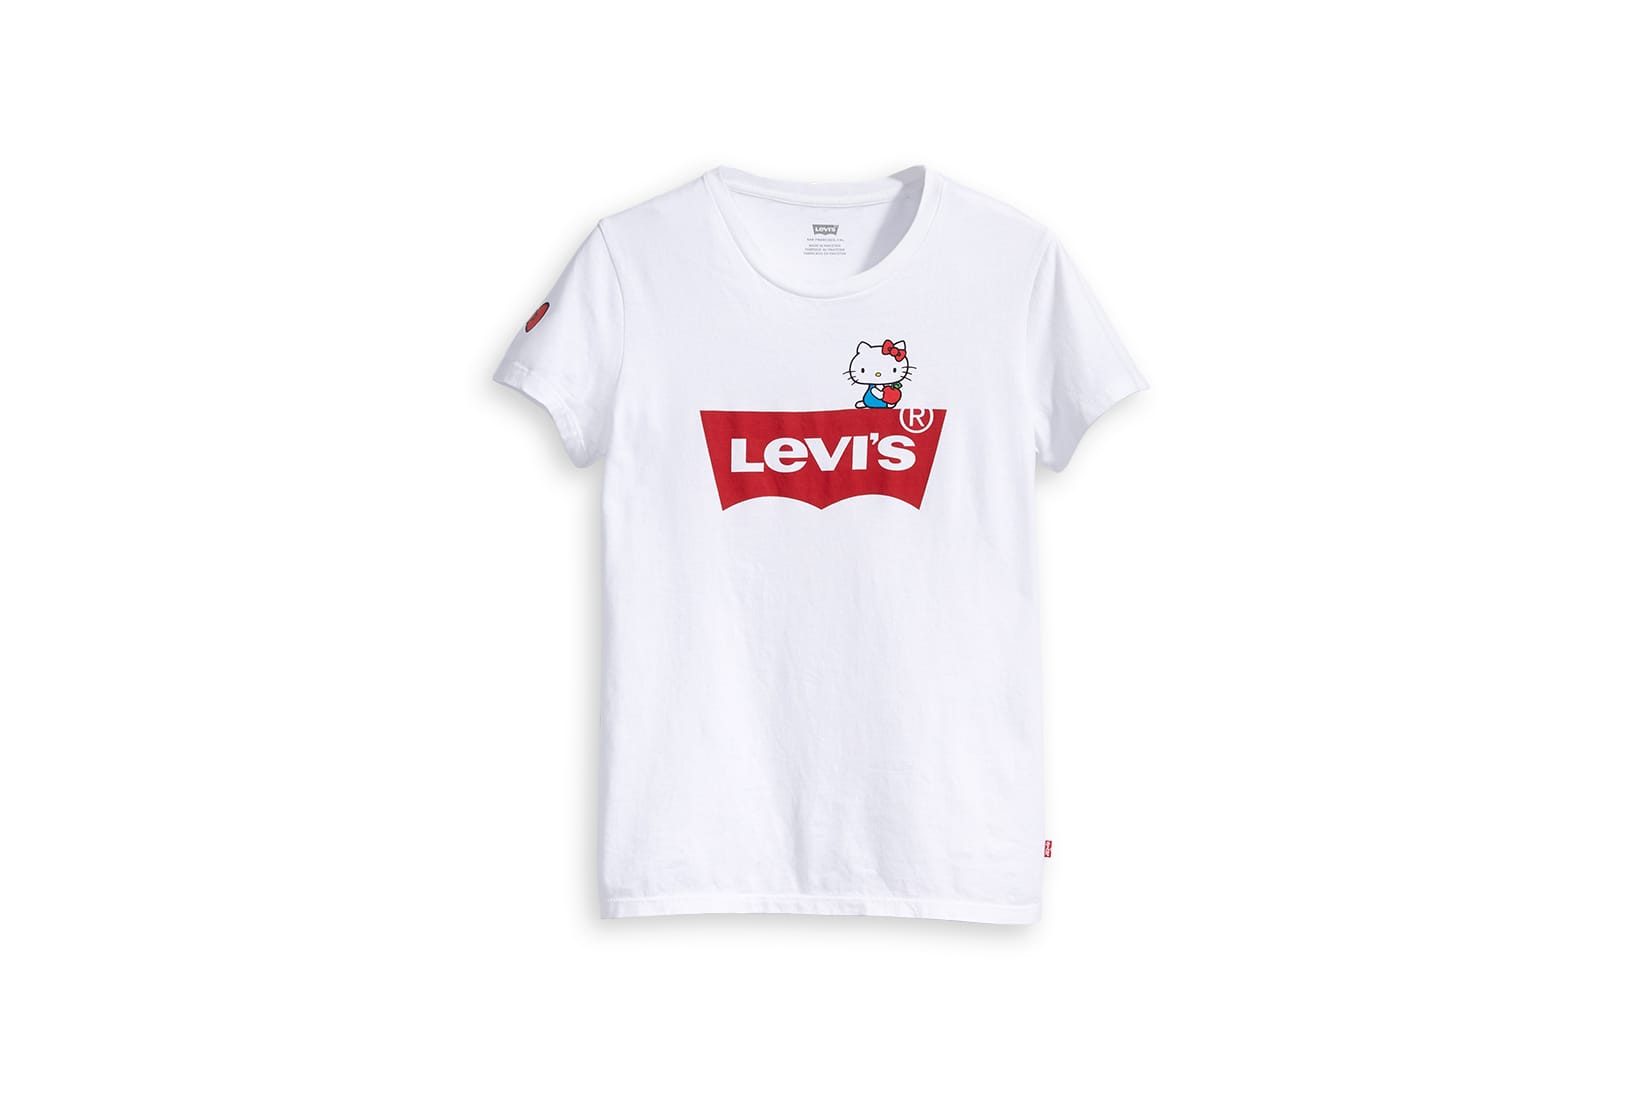 Levi's x Hello Kitty Limited-Edition 